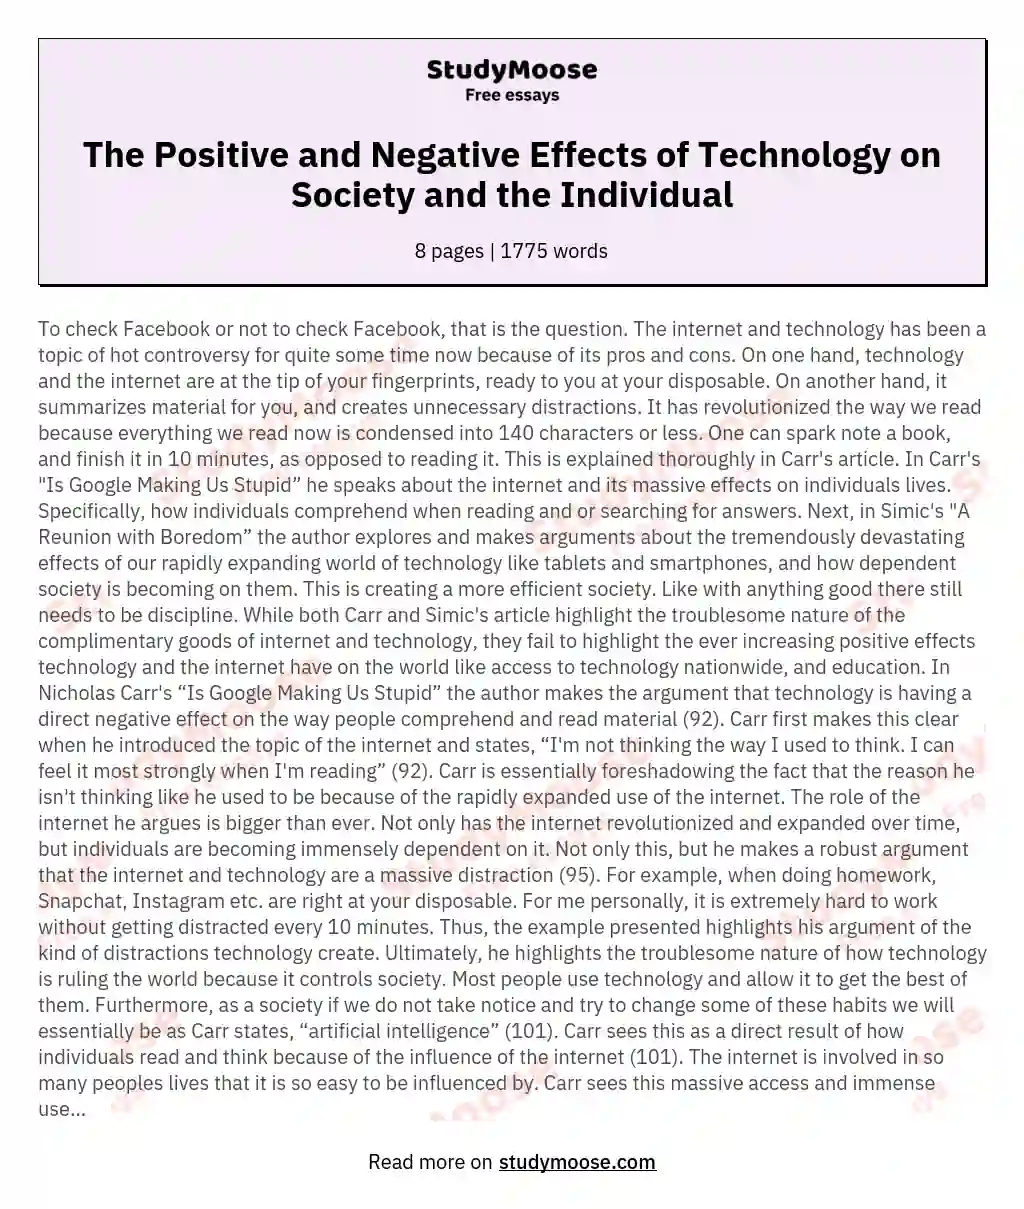 The Positive and Negative Effects of Technology on Society and the Individual